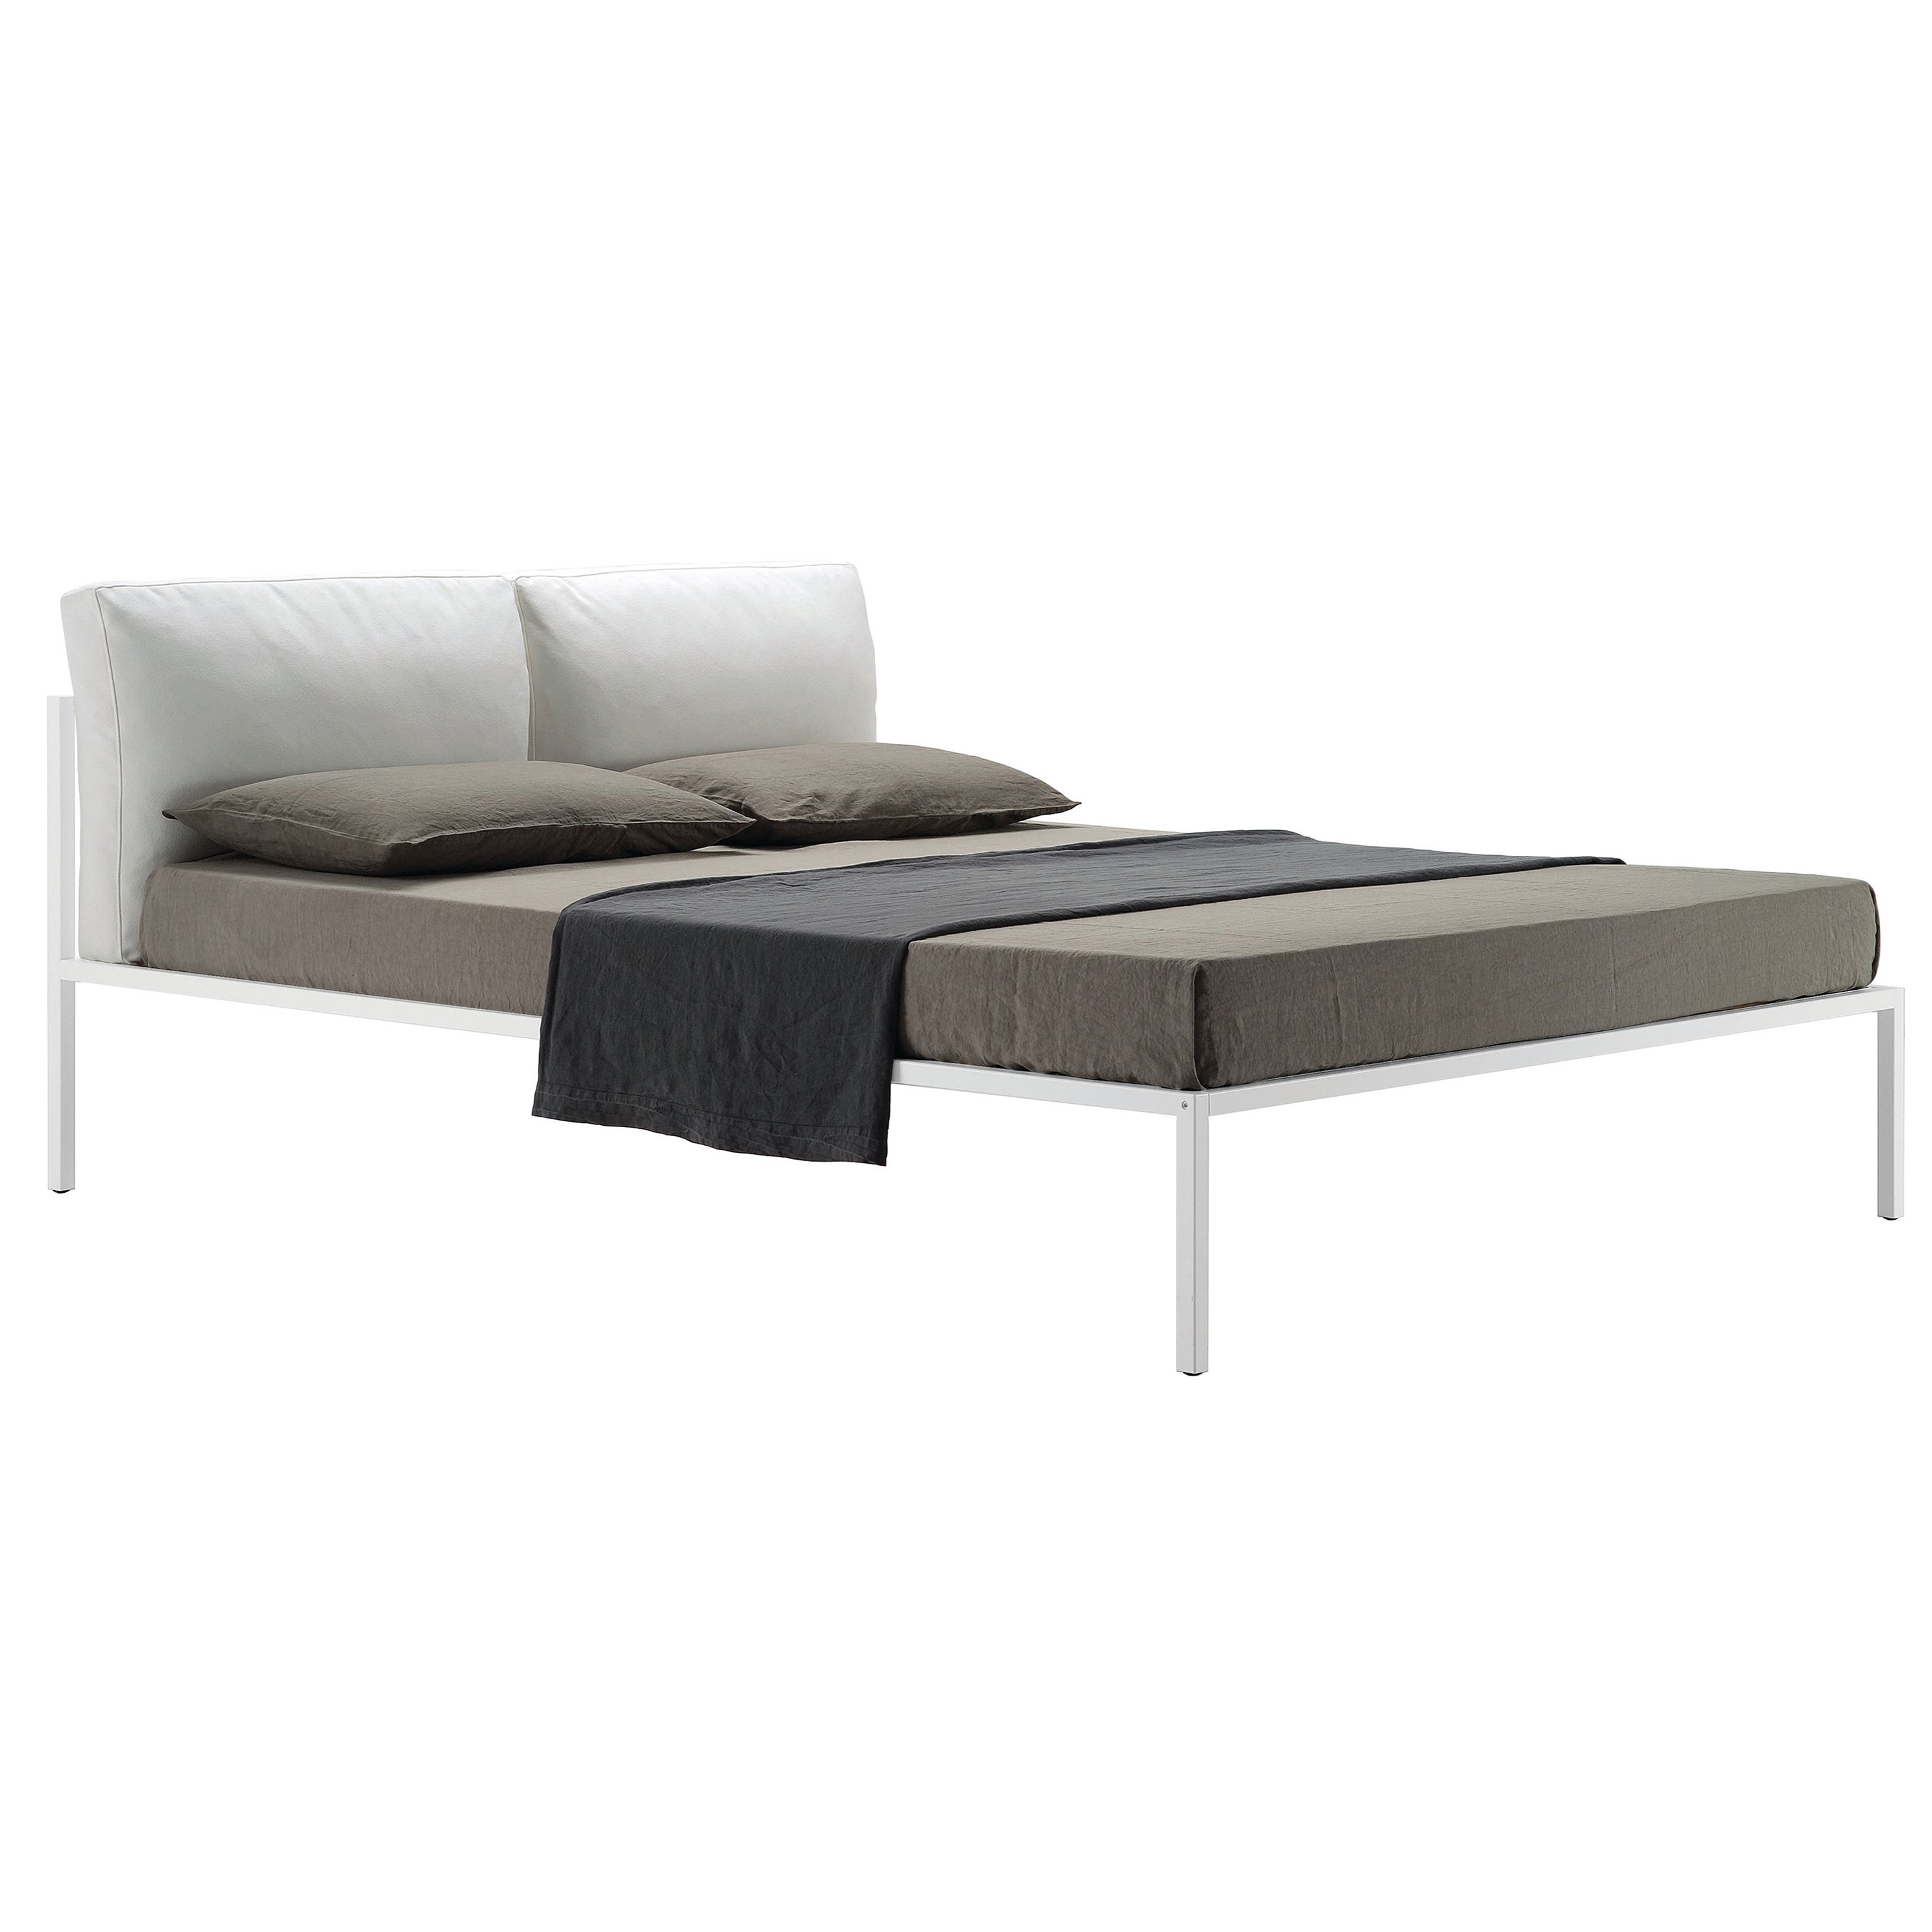 Zanotta Medium Nyx Bed in White Fabric with White Painted Steel Frame